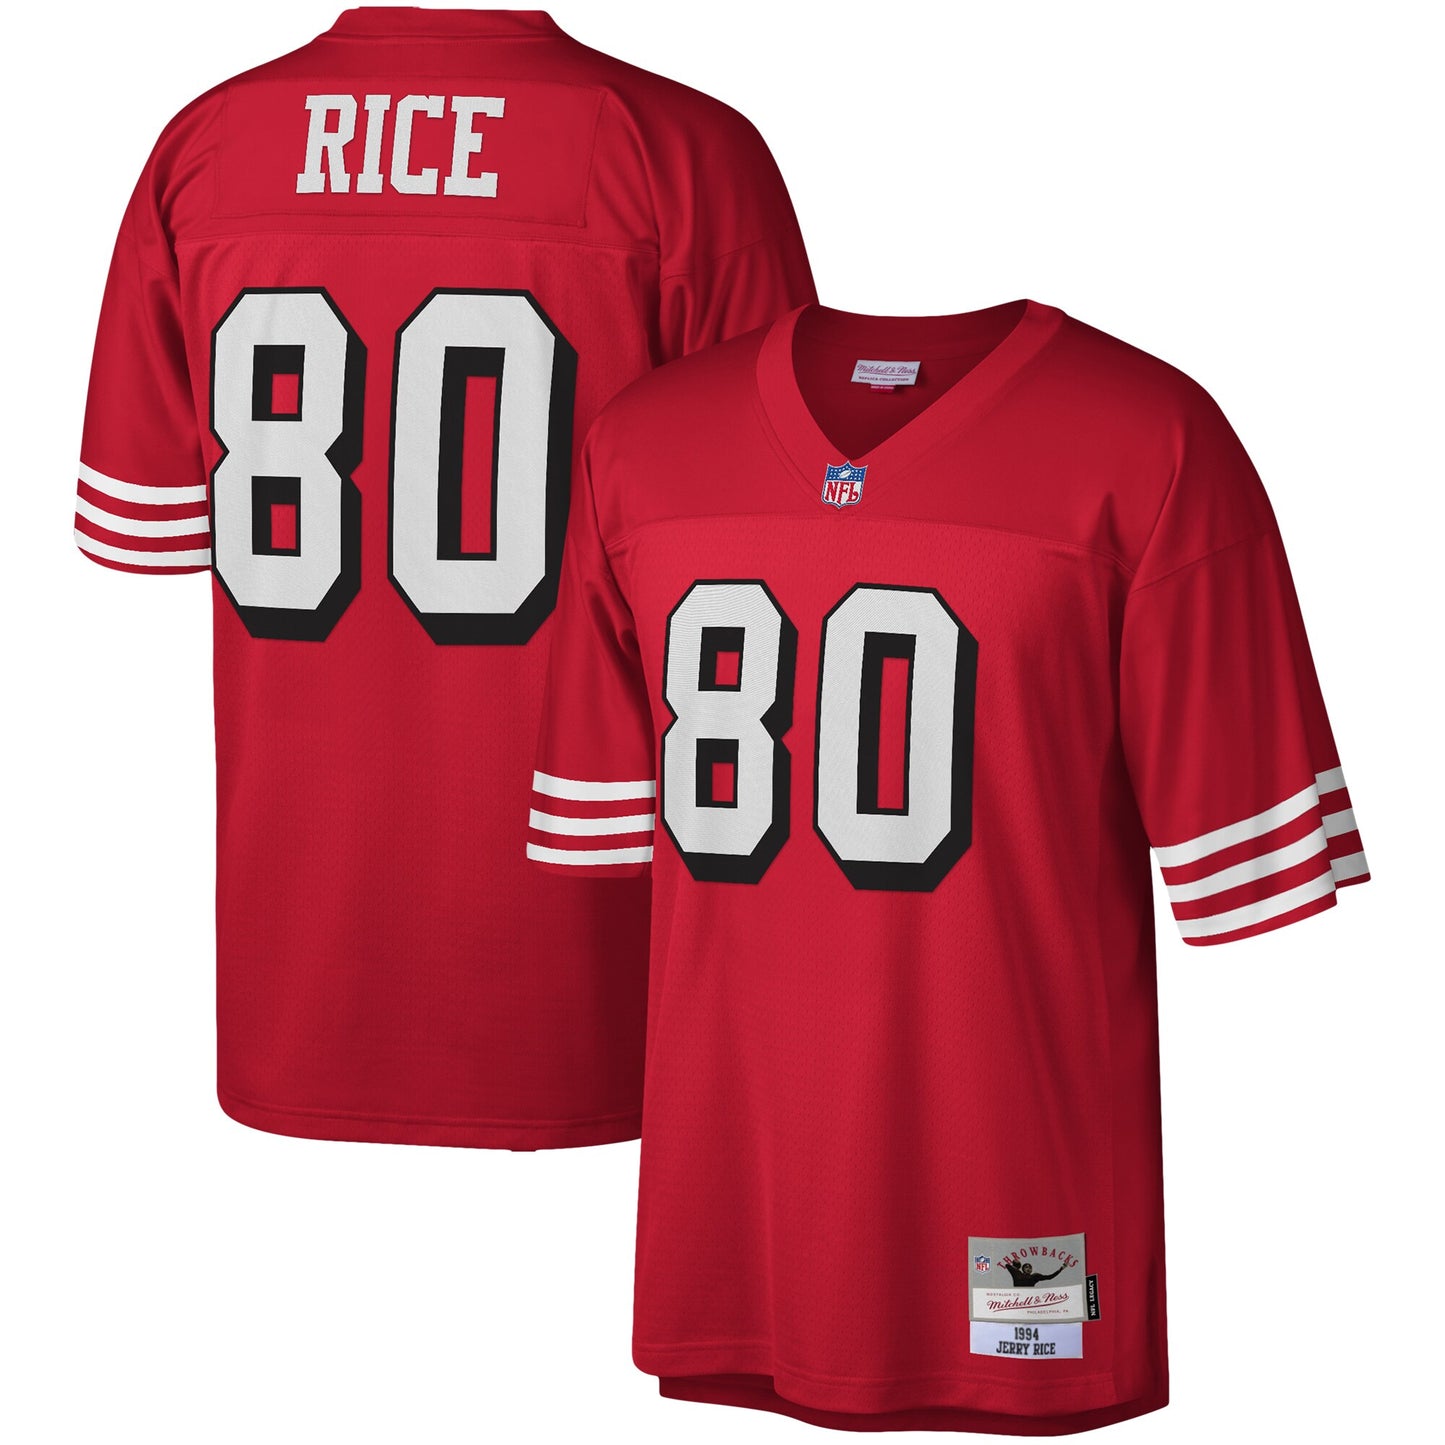 Jerry Rice San Francisco 49ers Mitchell & Ness Legacy Replica Jersey - Scarlet